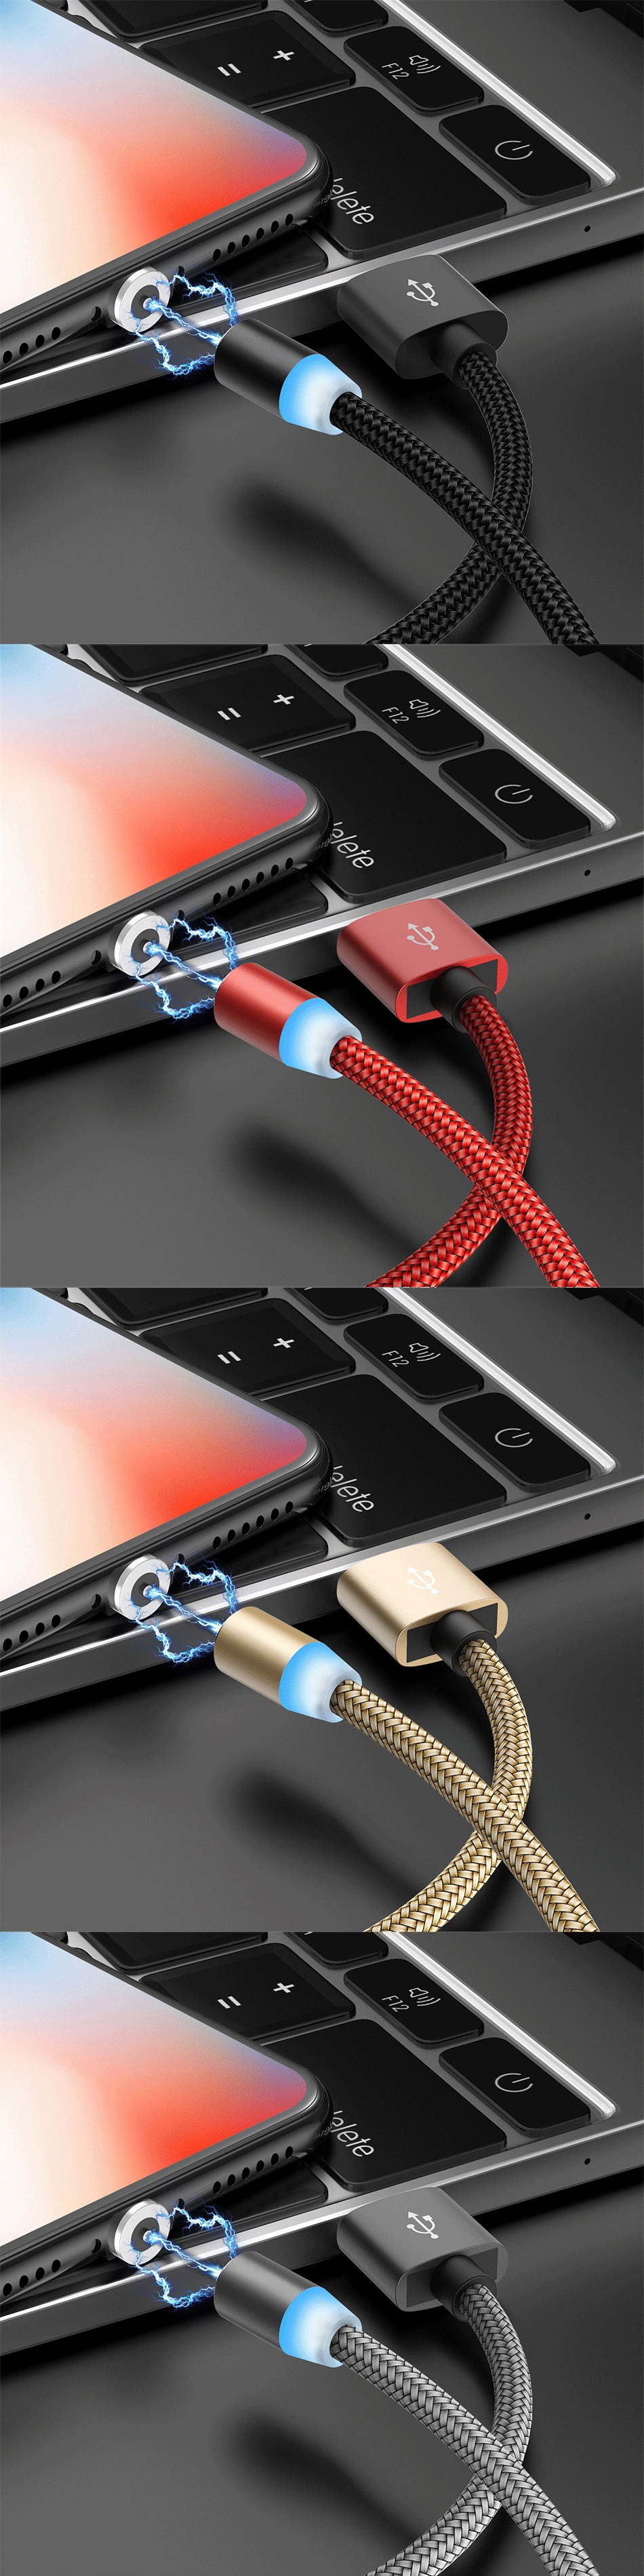 Bakeey-24A-Type-C-Micro-USB-LED-Indicator-Fast-Charging-Data-Cable-For-Huawei-P30-Pro-Mate-30-Mi9-9P-1587077-11